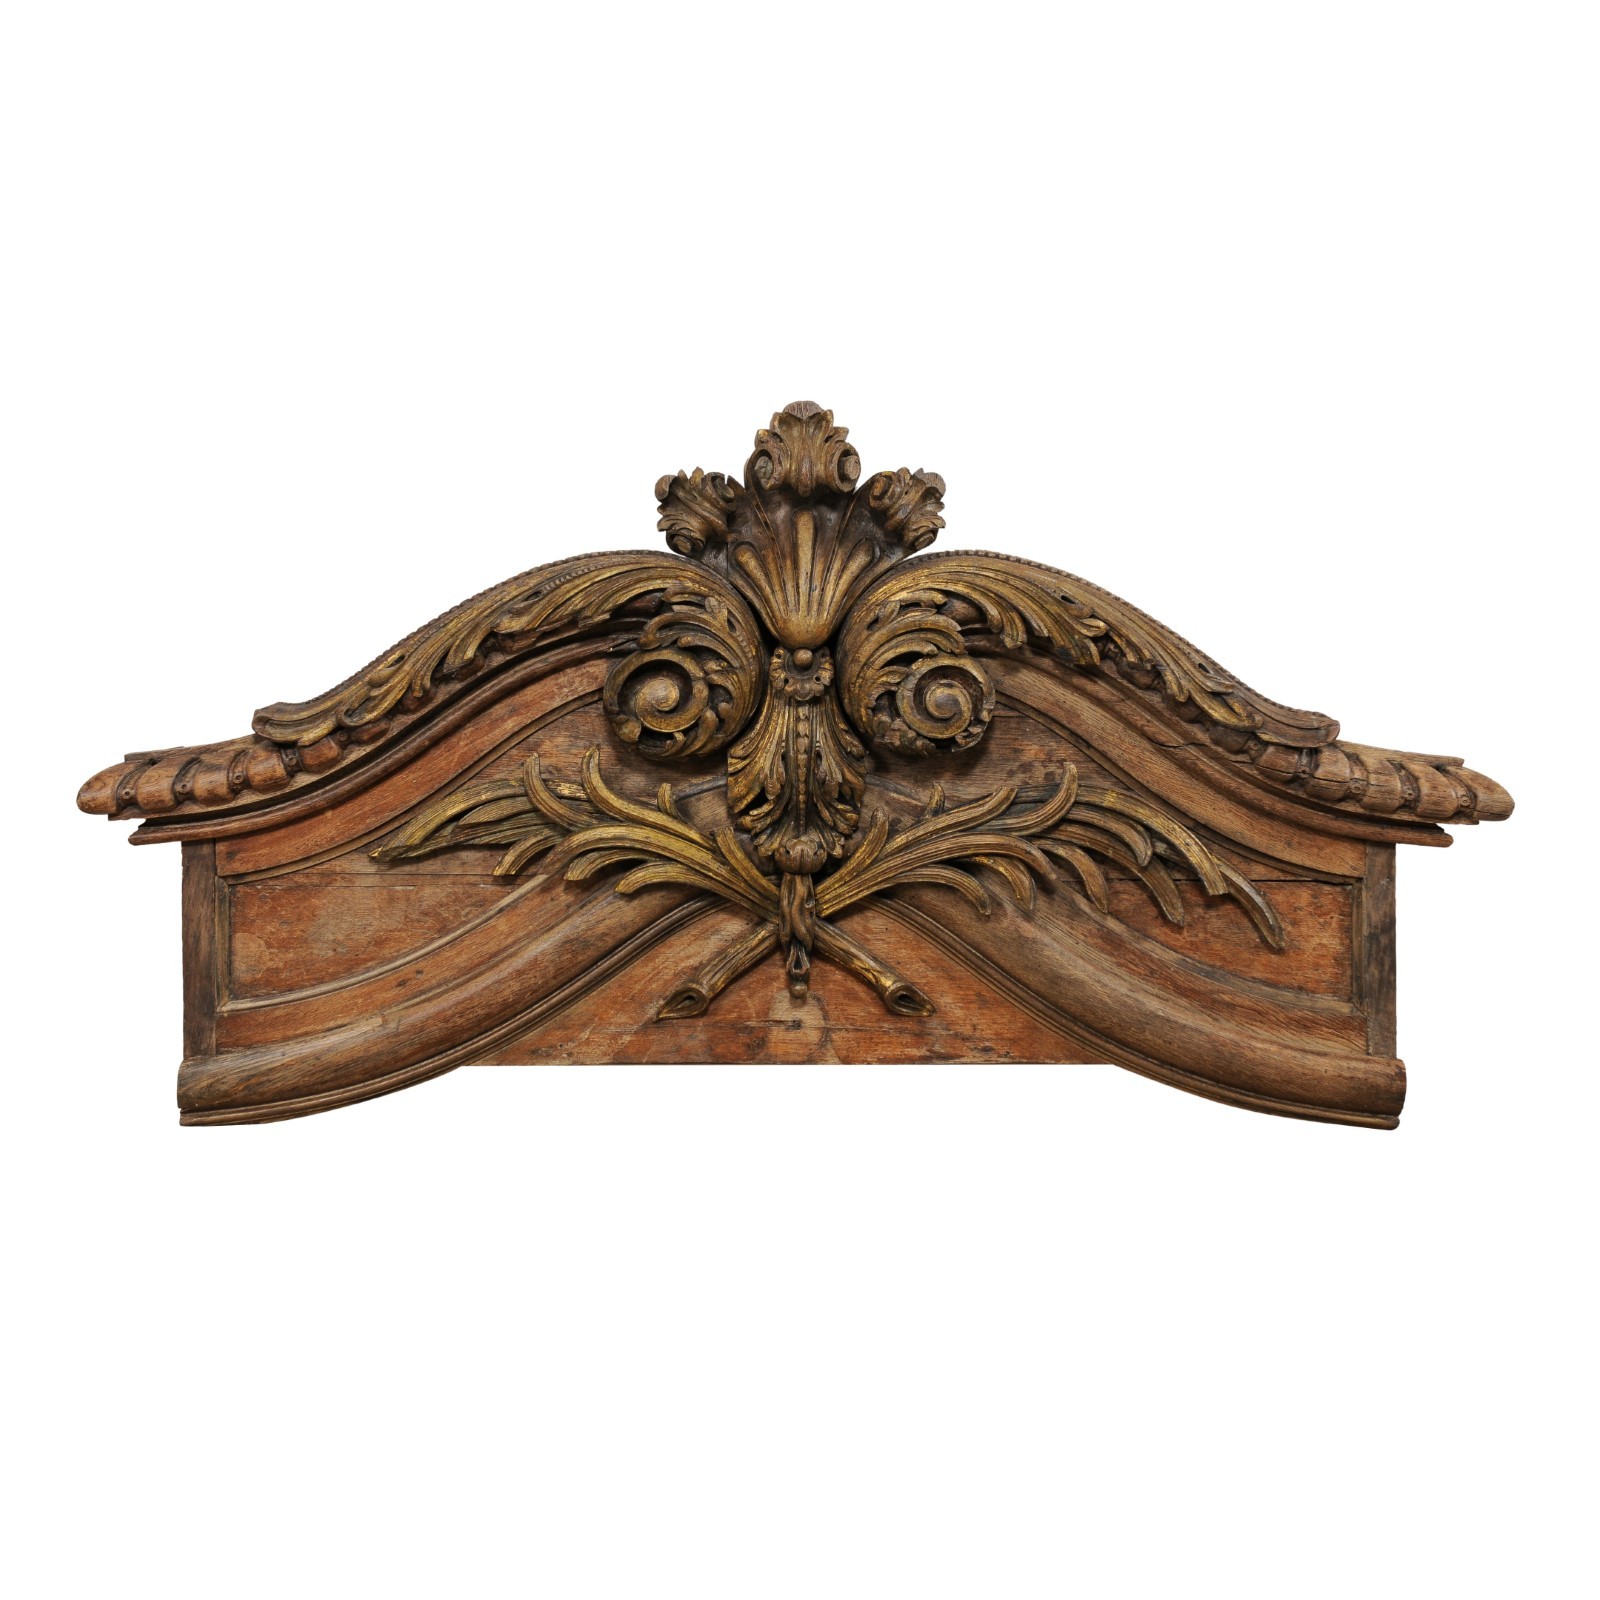 19th C. Carved Plaque- Great for Headboard!